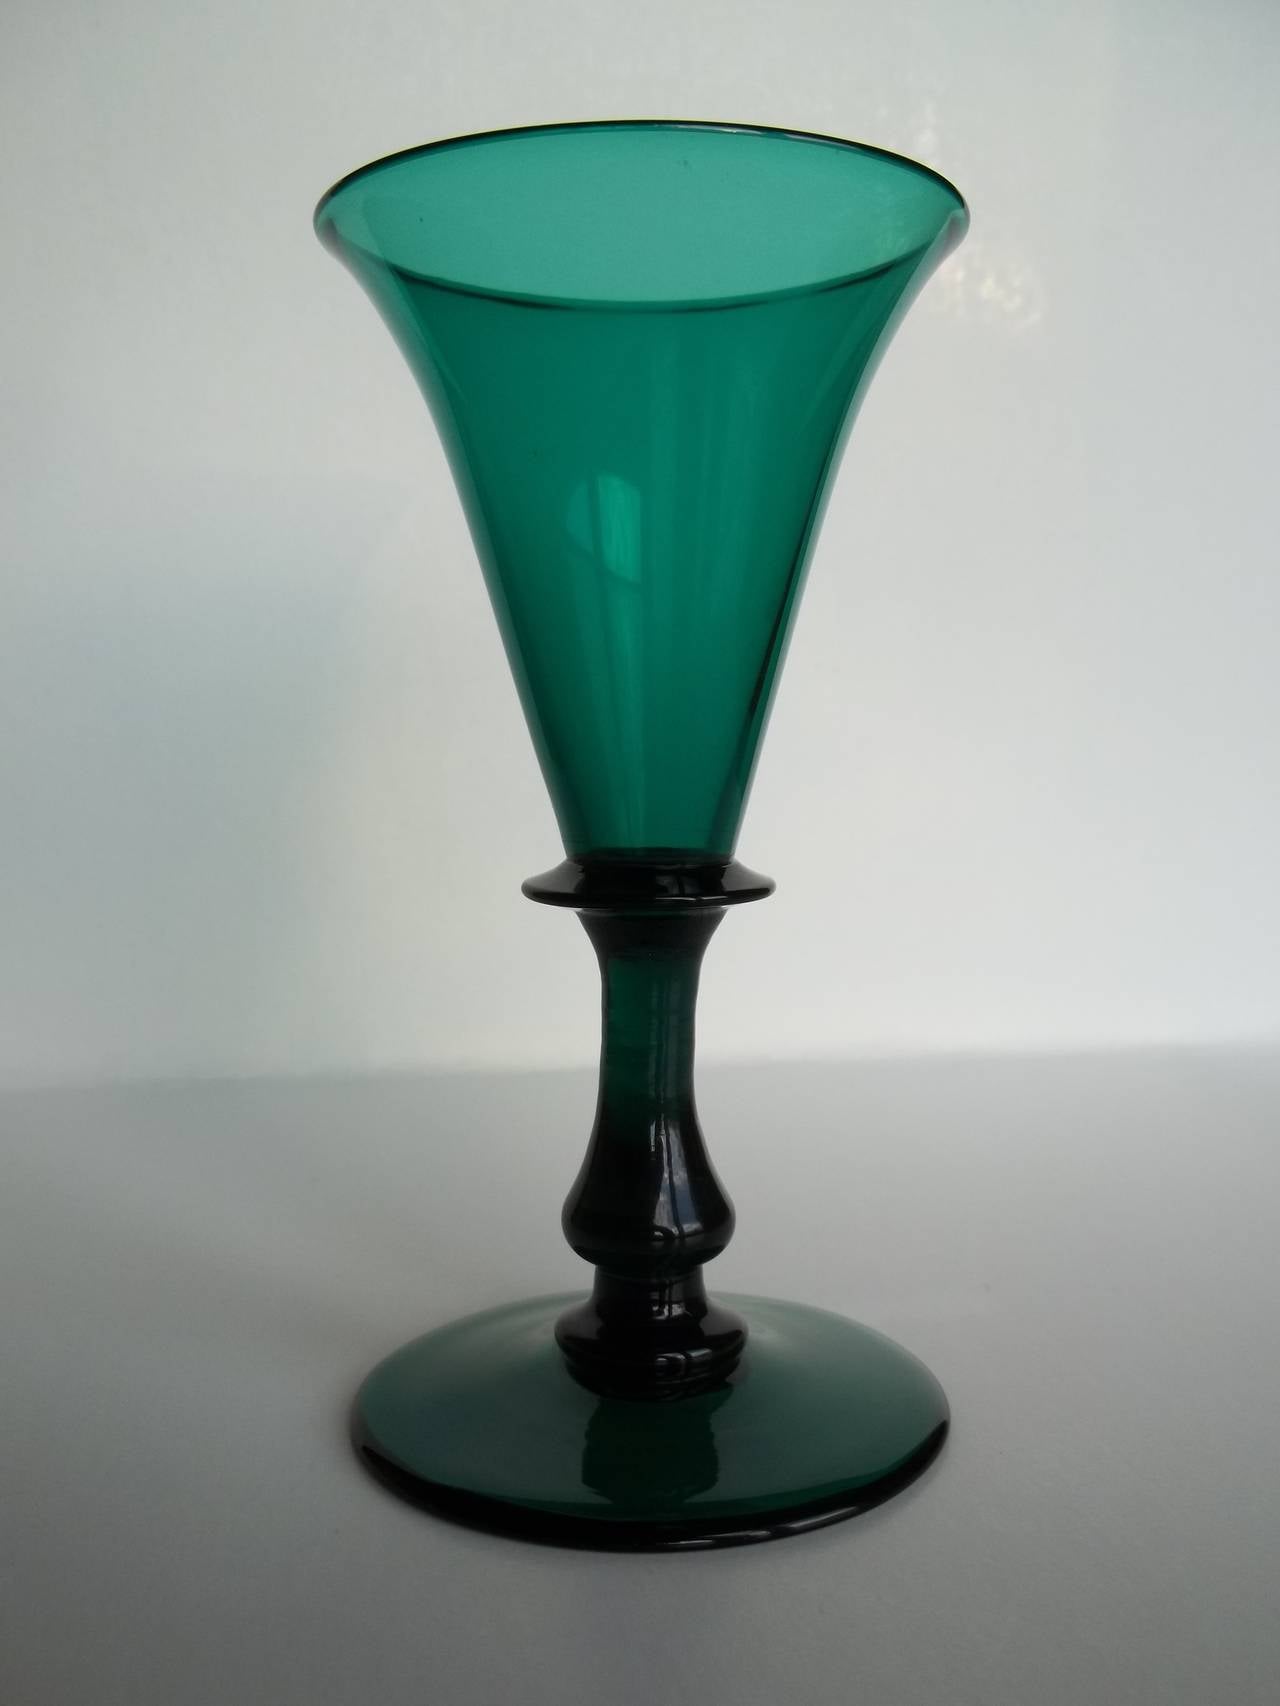 This is an excellent example of an early 19th century, English, hand blown, Bristol green wine drinking glass which we date to the George 111rd Regency period, circa 1815.

This glass has an elegant bell shaped bowl with a bladed shoulder knop